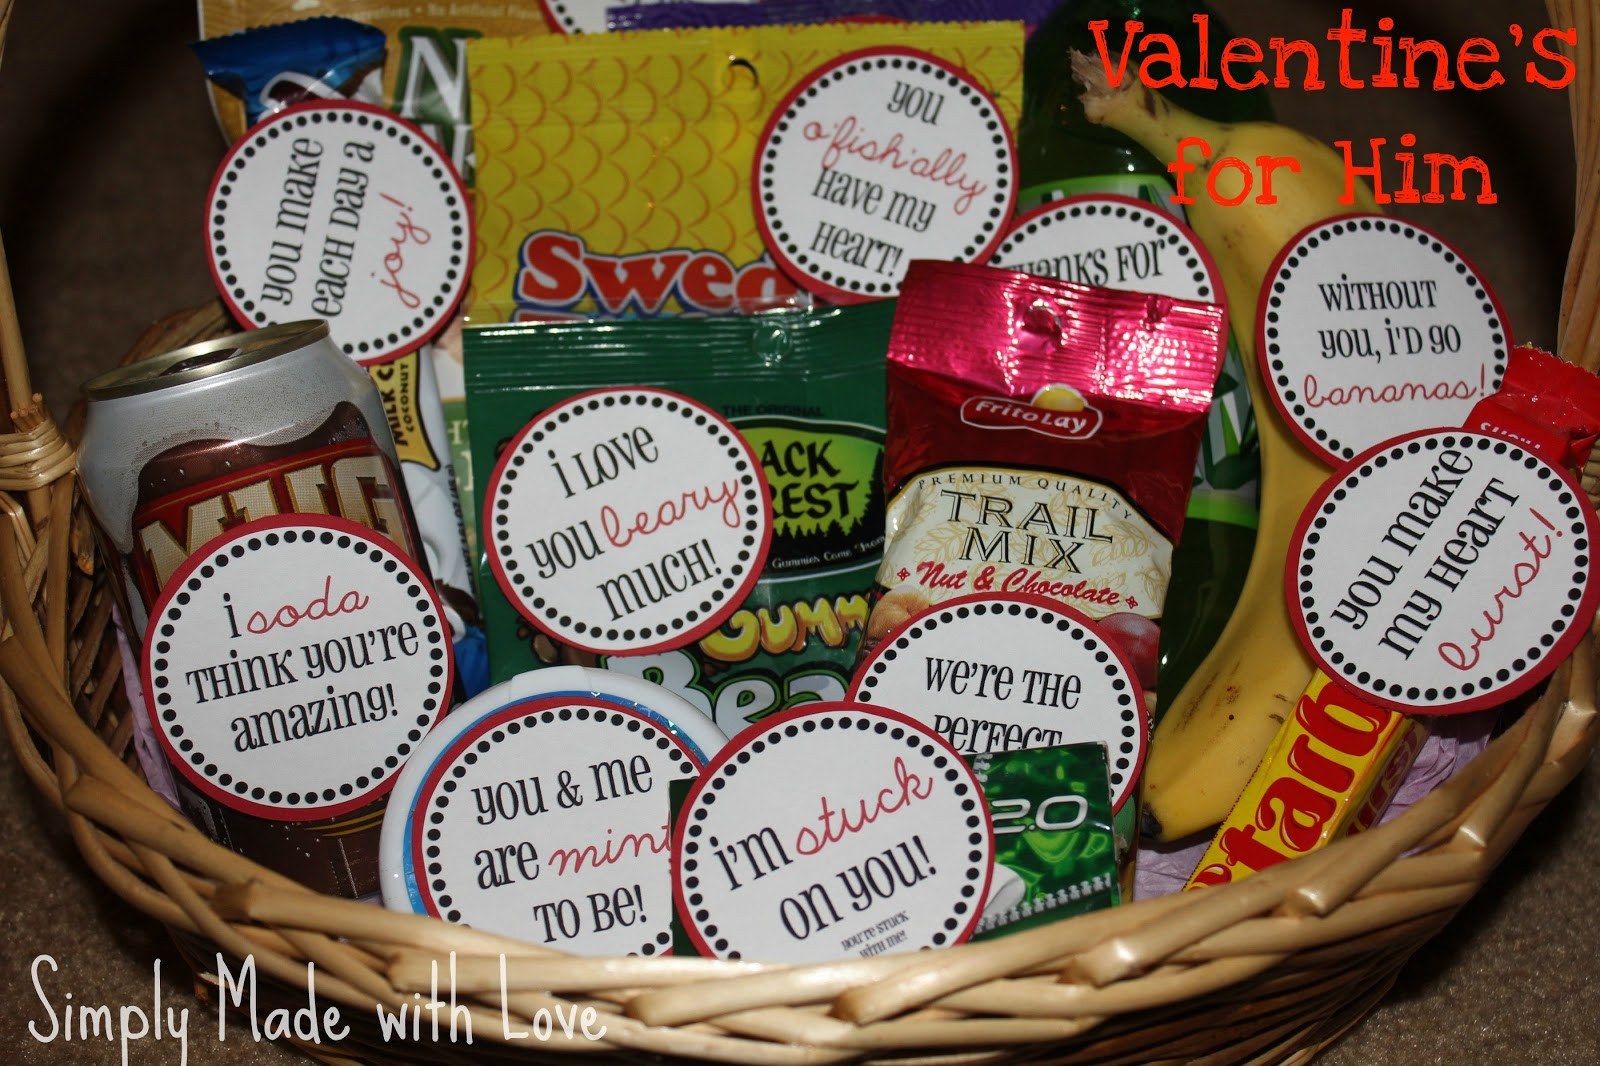 I Love You Gift Ideas For Girlfriend
 simply made with love Valentine s for Him & Free Printable